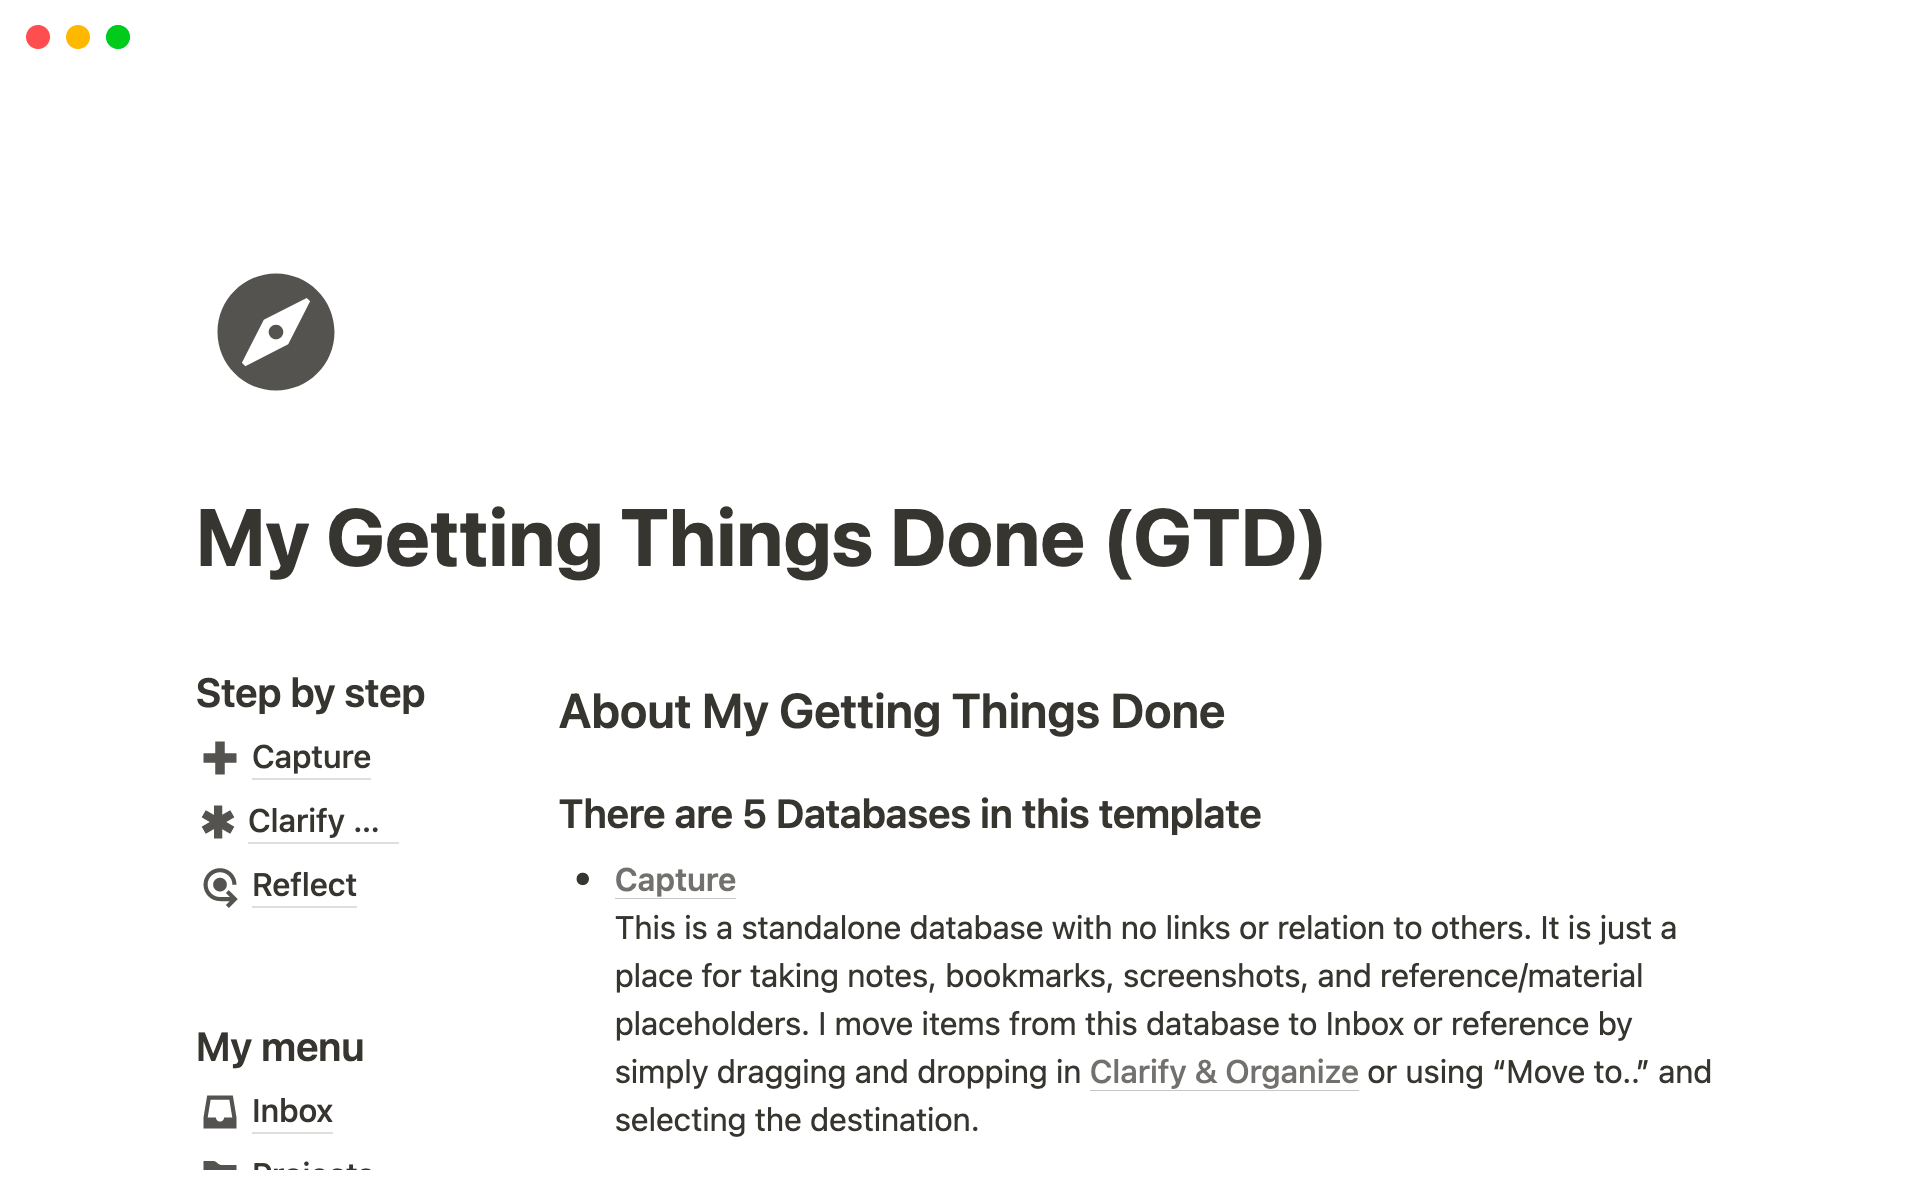 Simplify your GTD set up. Start simple and make it yours on the go.